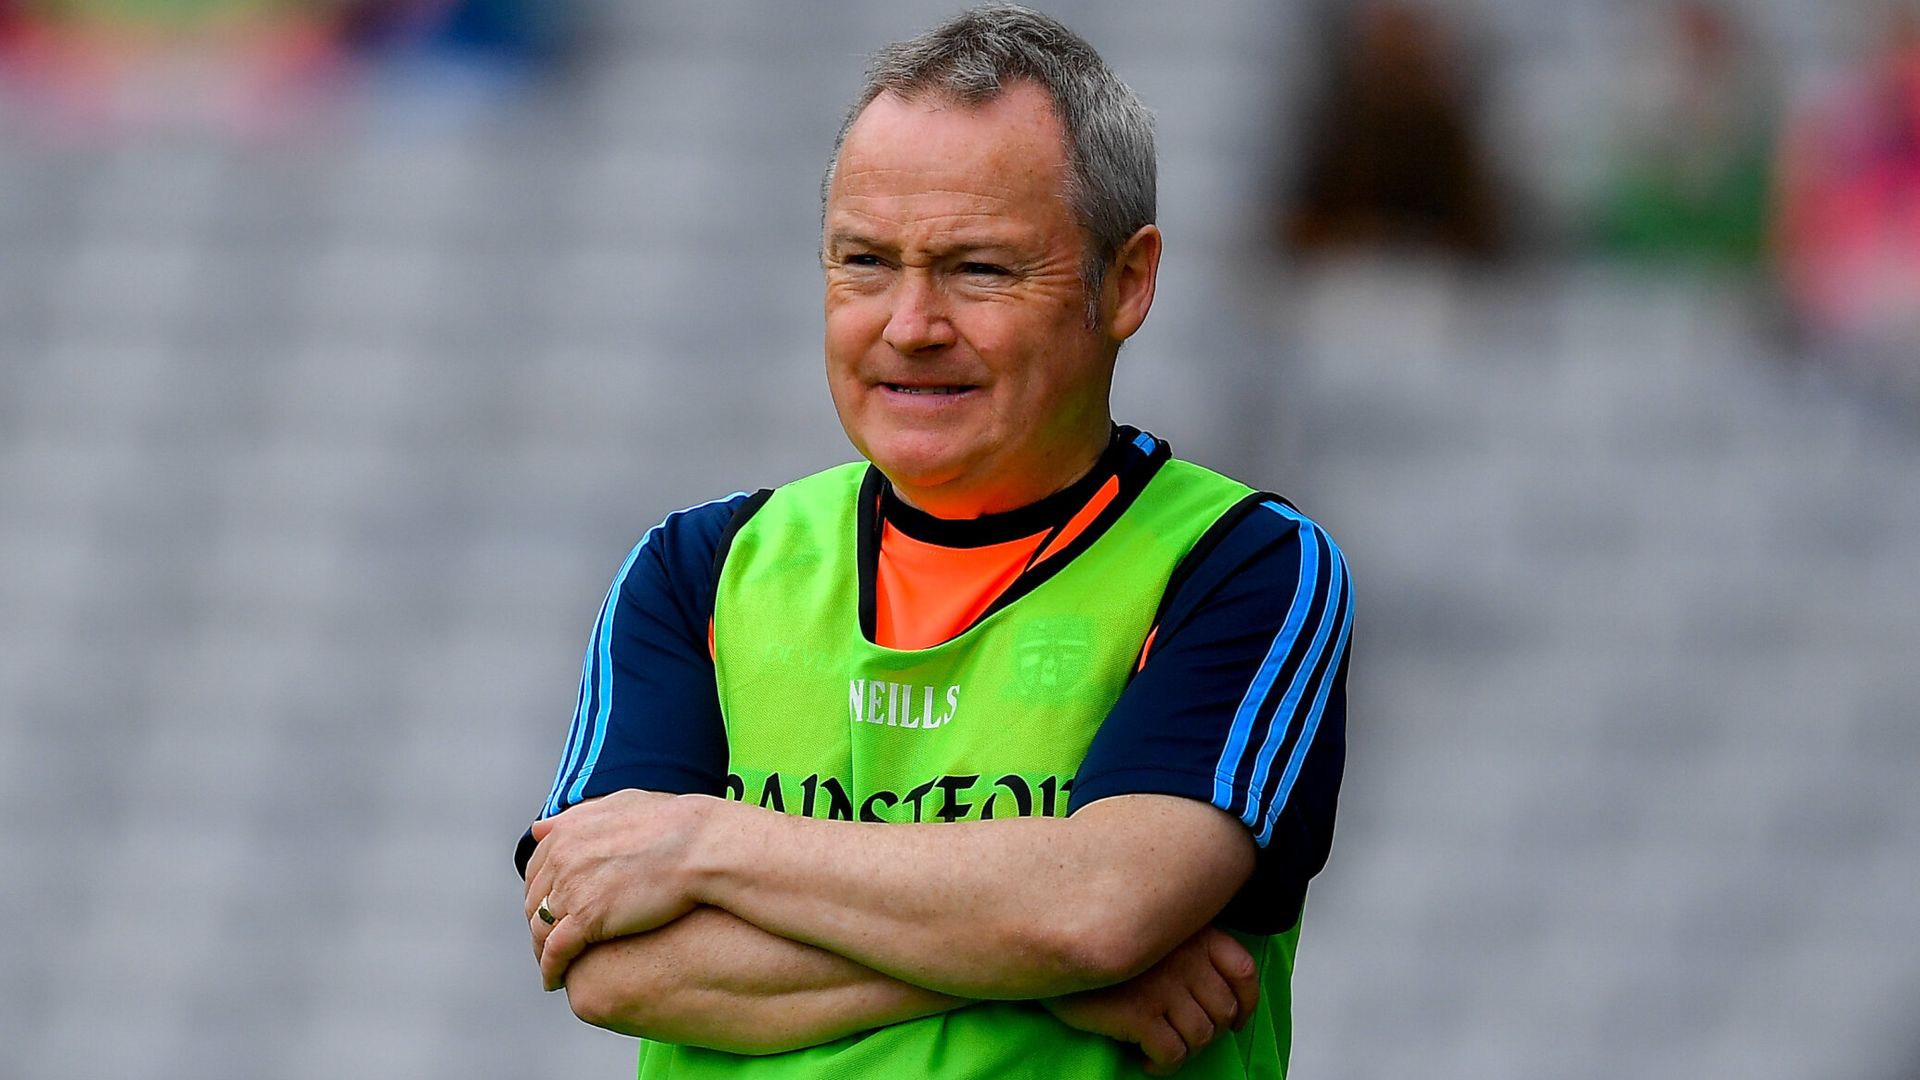 Nelson to take charge of Meath ladies footballers